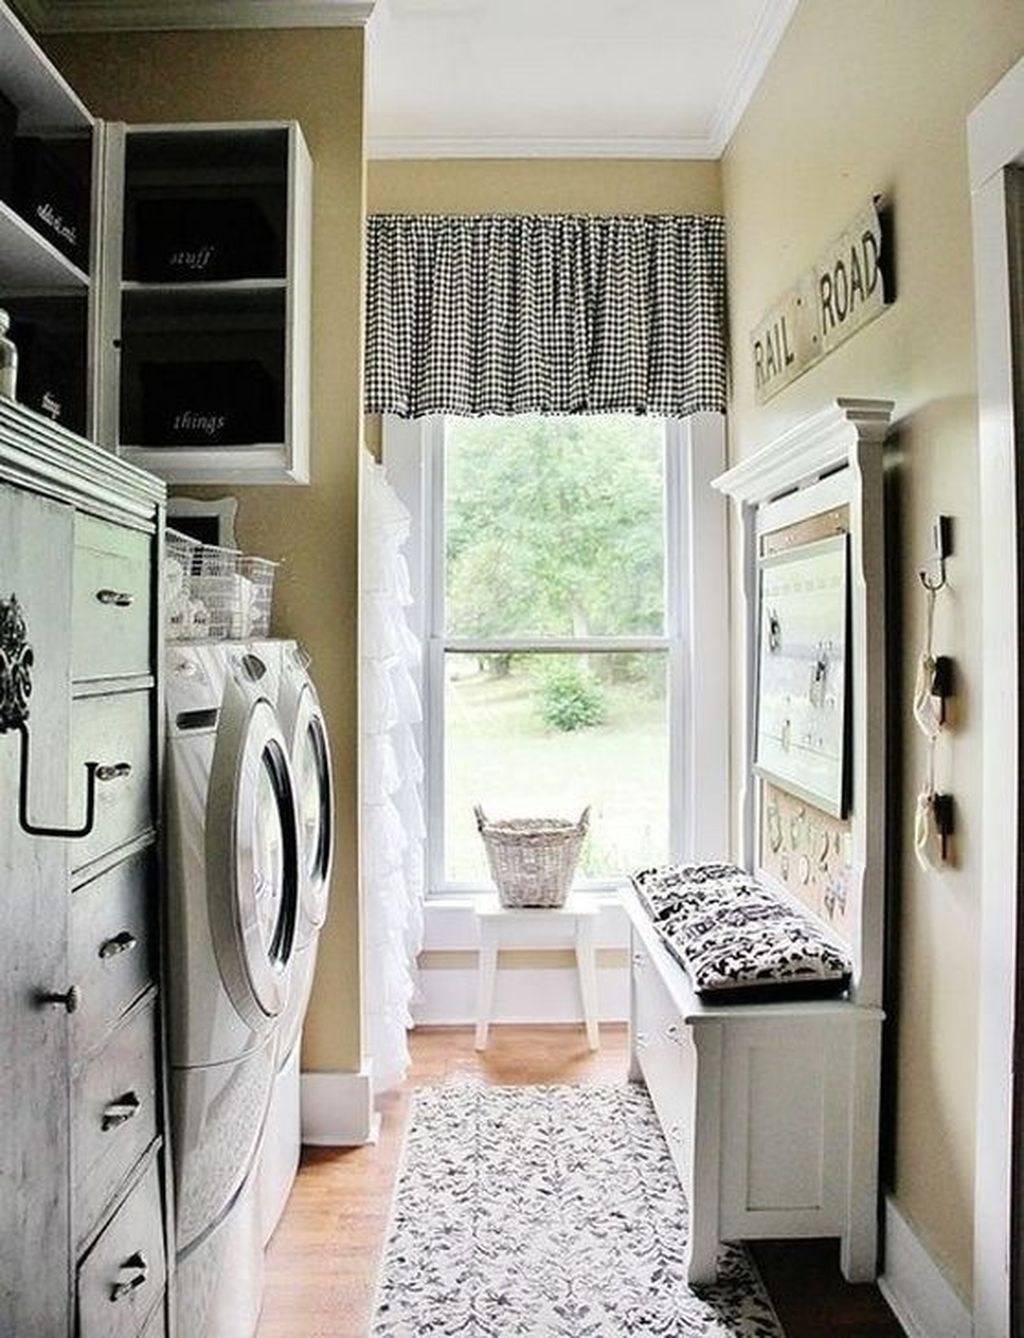 Inspiring Laundry Room Design With French Country Style 03